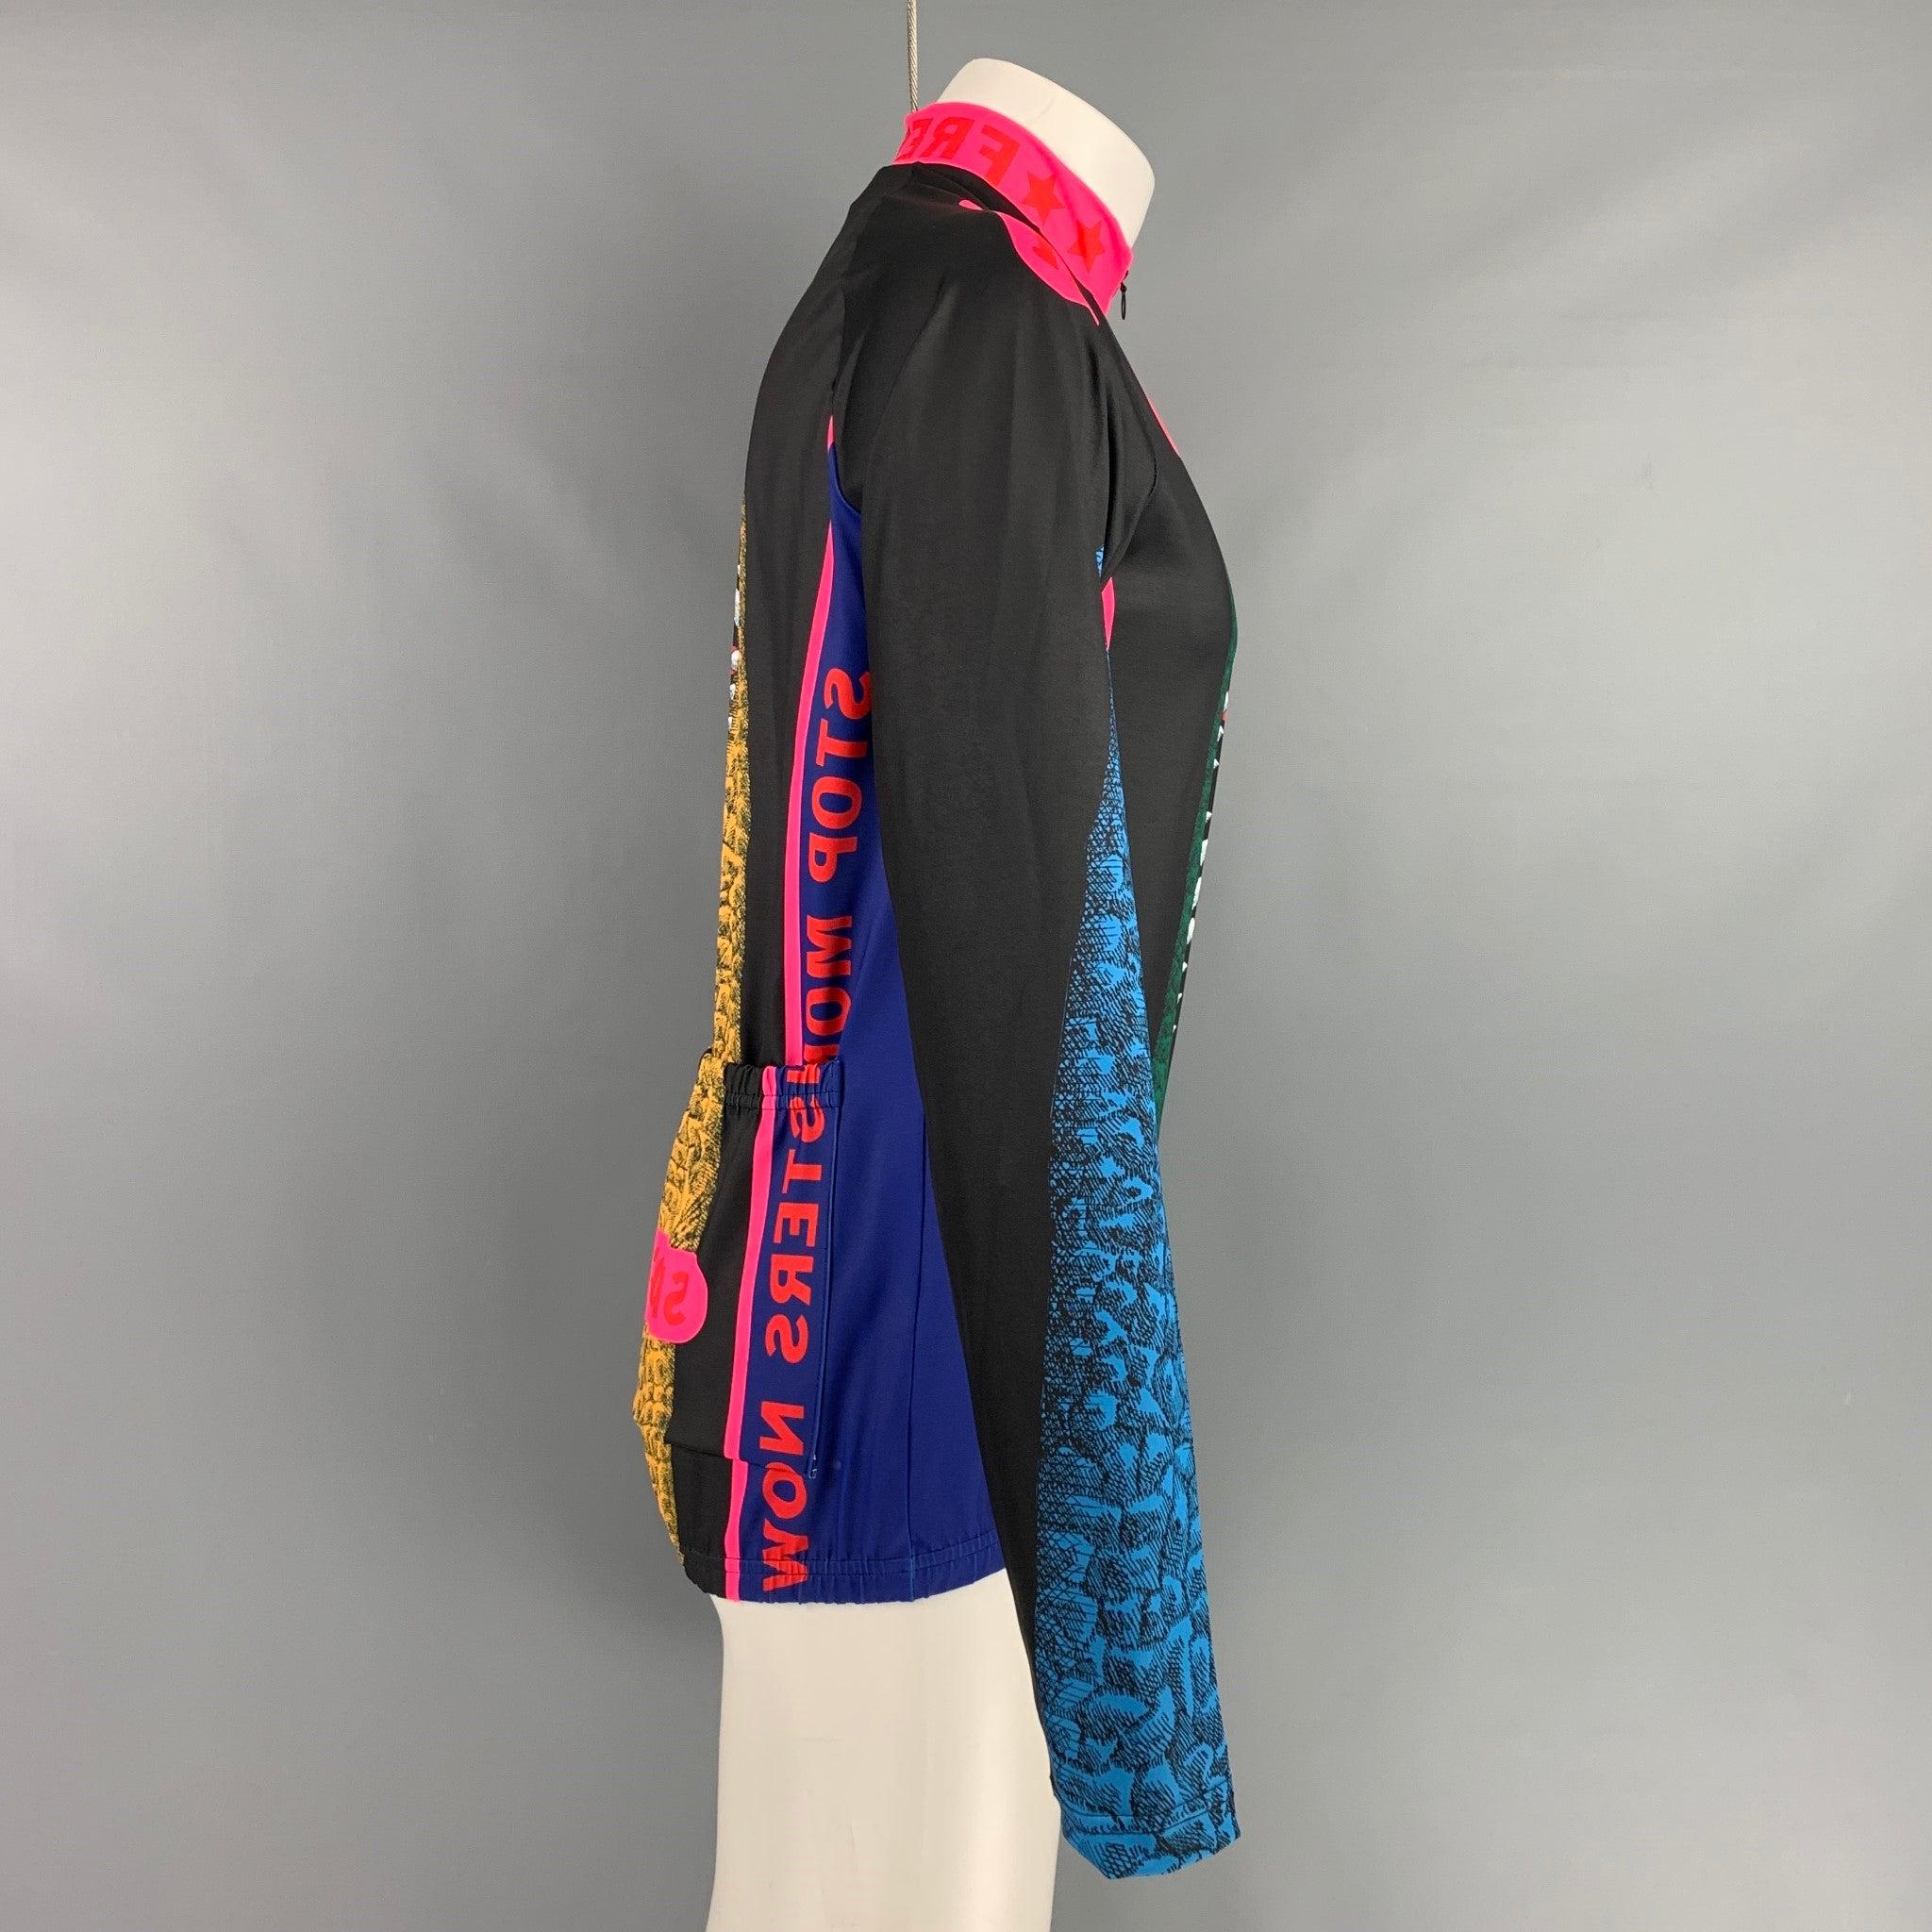 Walter Van Beirendonck Cycle Biker Jersey Pullover Top from Spring Summer 2021 Future Proof collection. Features a stretch material quarter zip graphic print design, collar and back pockets.Introduced as part of Walter Van Beirendonck’s W<